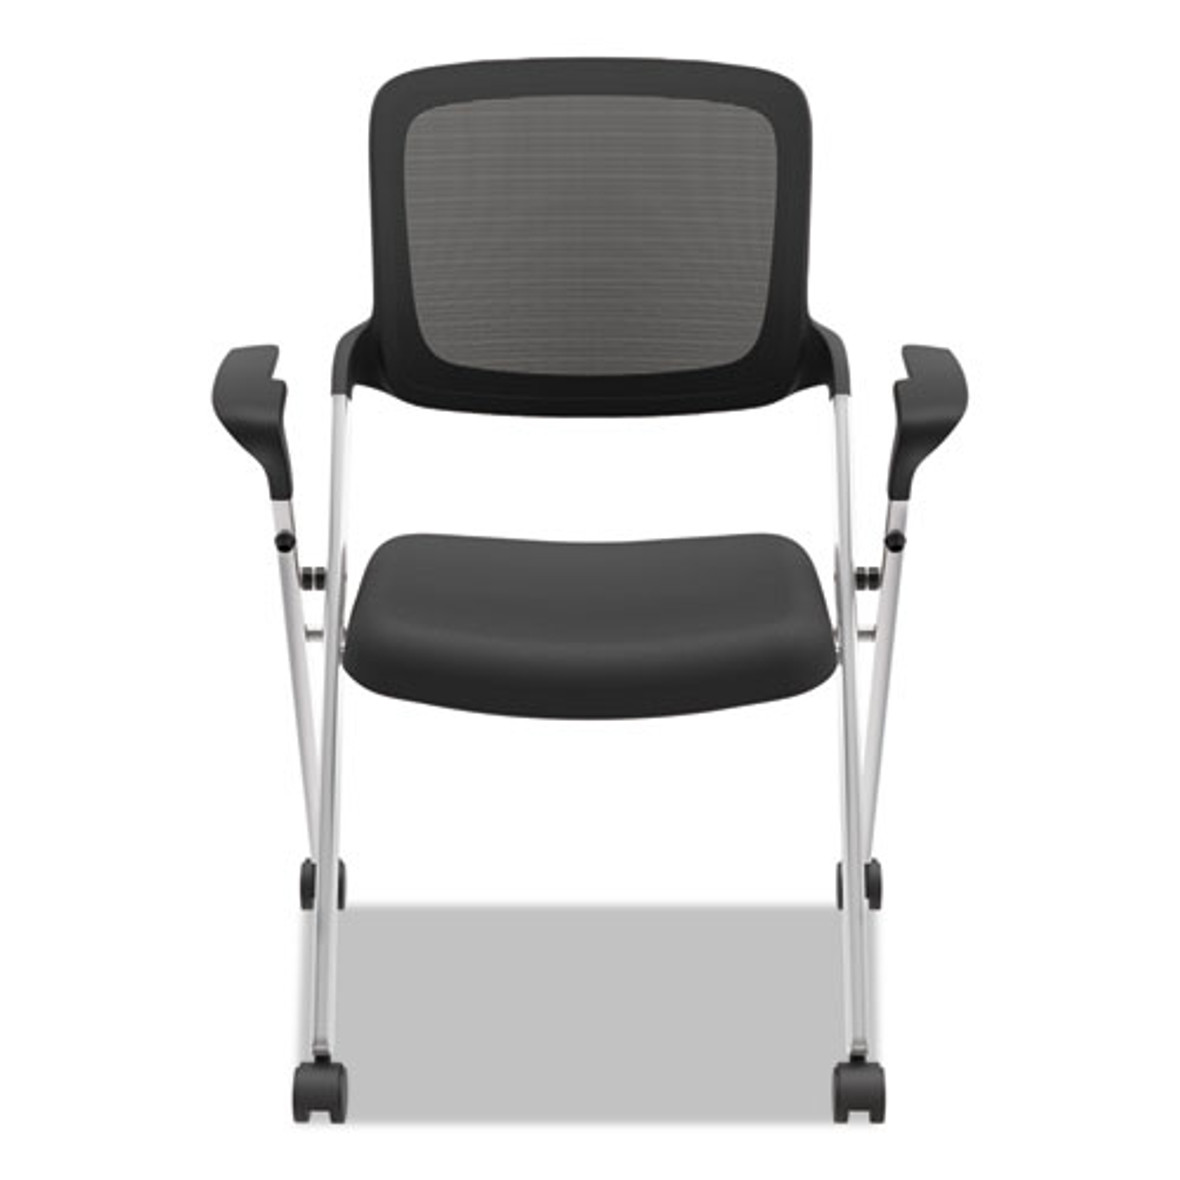 Vl314 Mesh Back Nesting Chair, Supports Up To 250 Lb, 19" Seat Height, Black Seat, Black Back, Silver Base